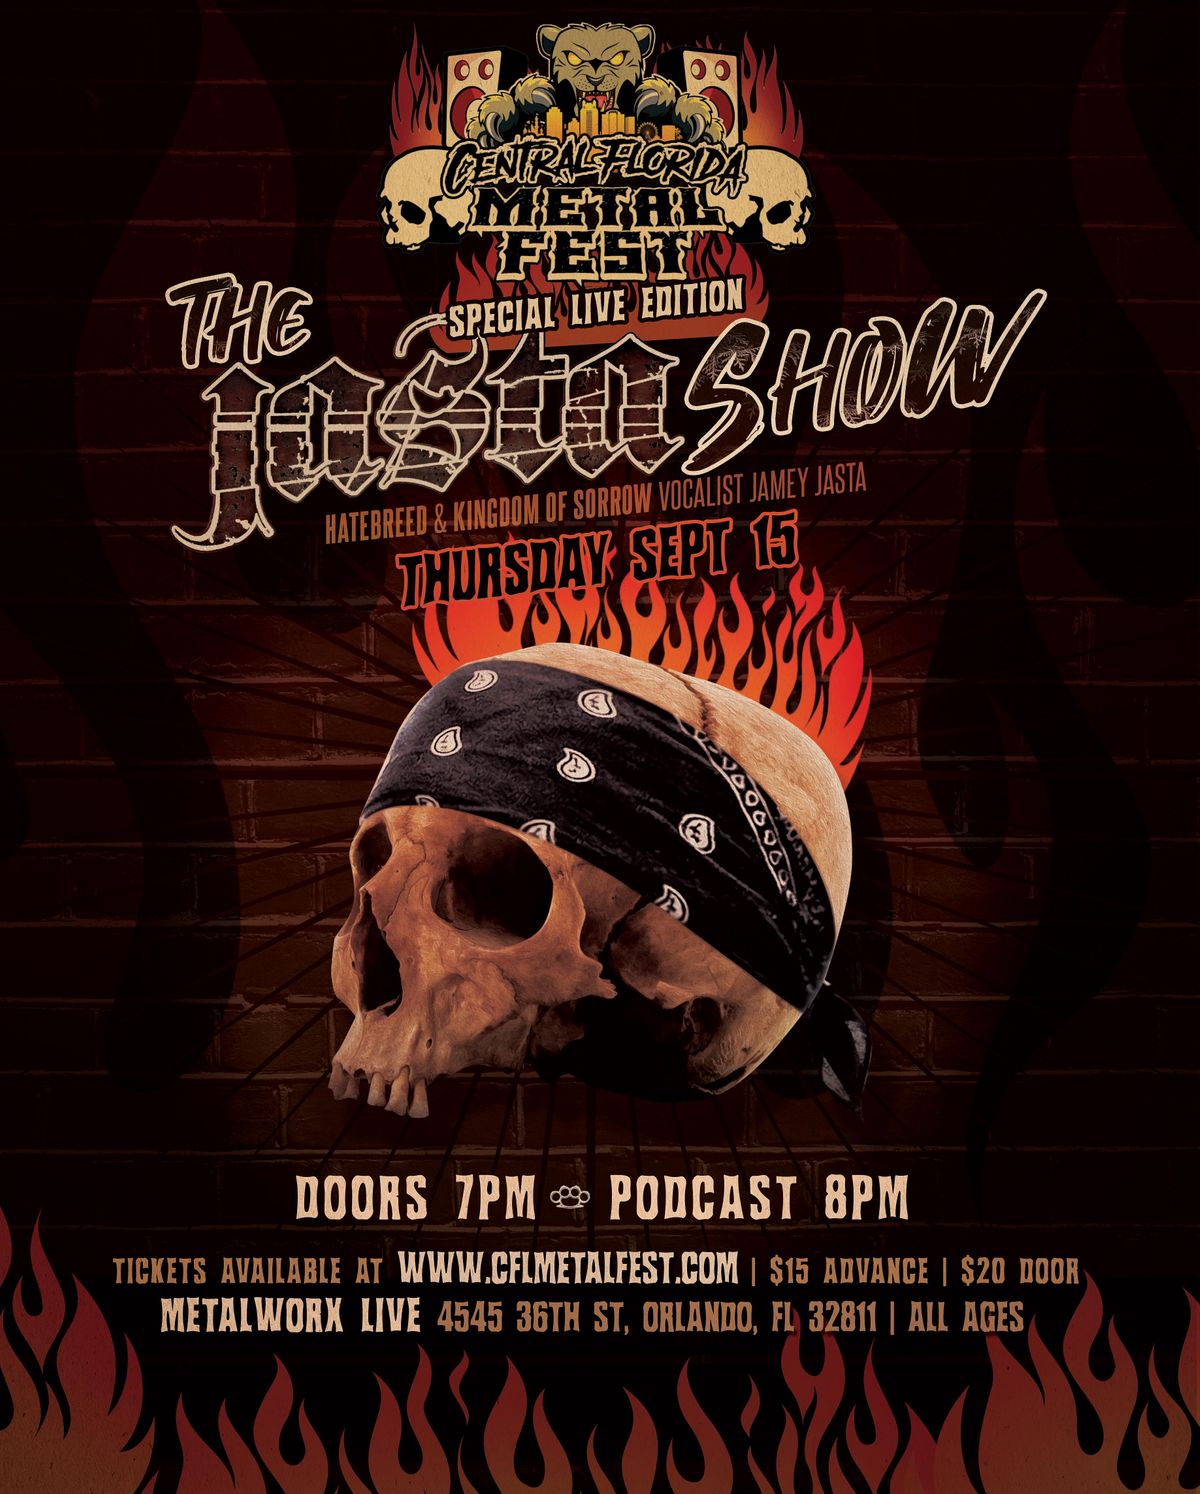 CFMF PRESENTS A SPECIAL LIVE EDITION OF "THE JASTA SHOW "